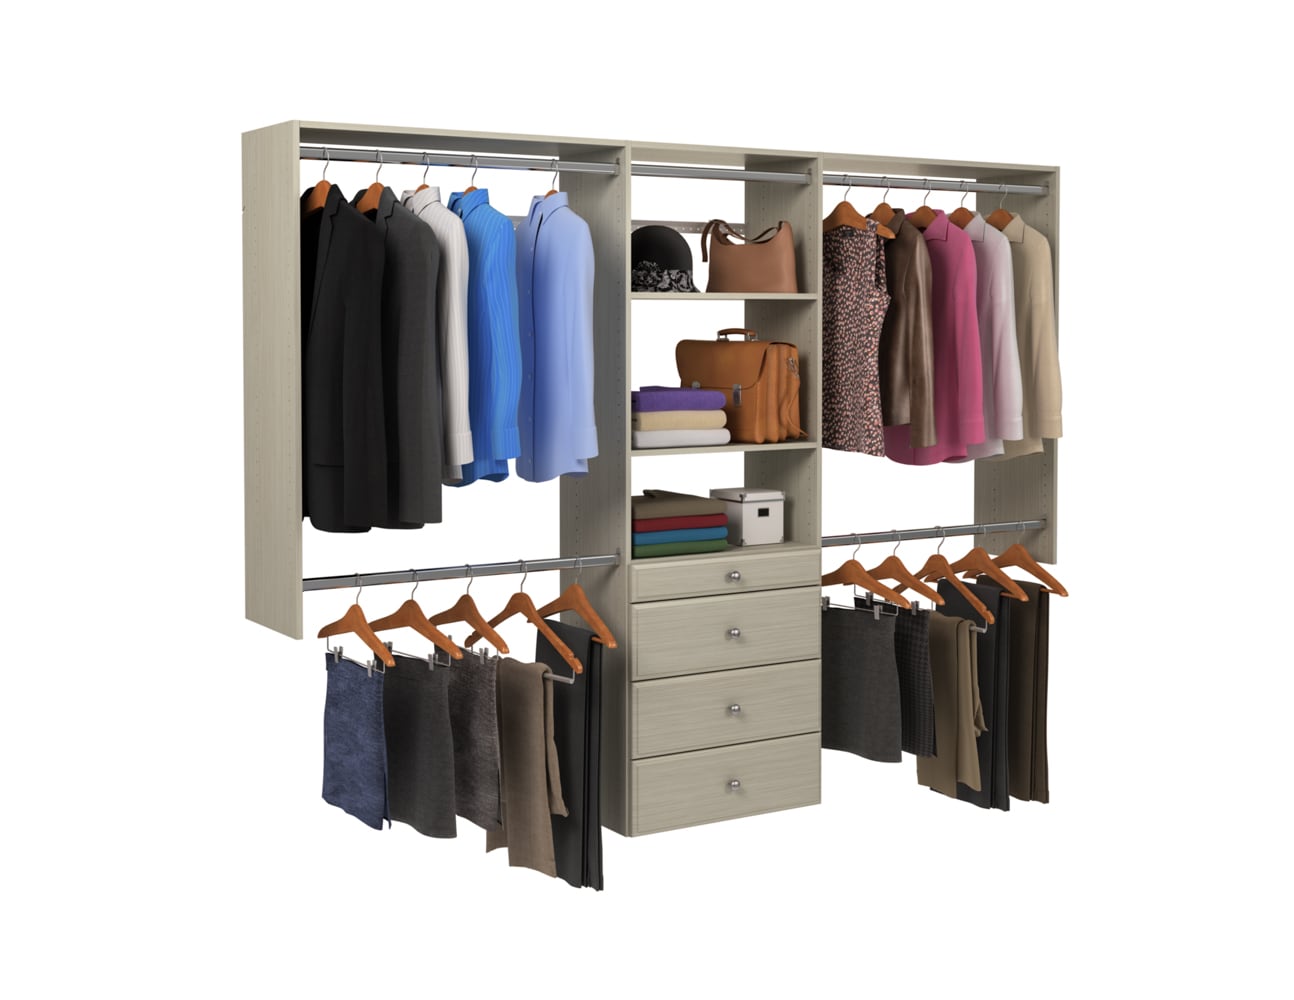 Small Closet Starter Kit with Grey Accessories